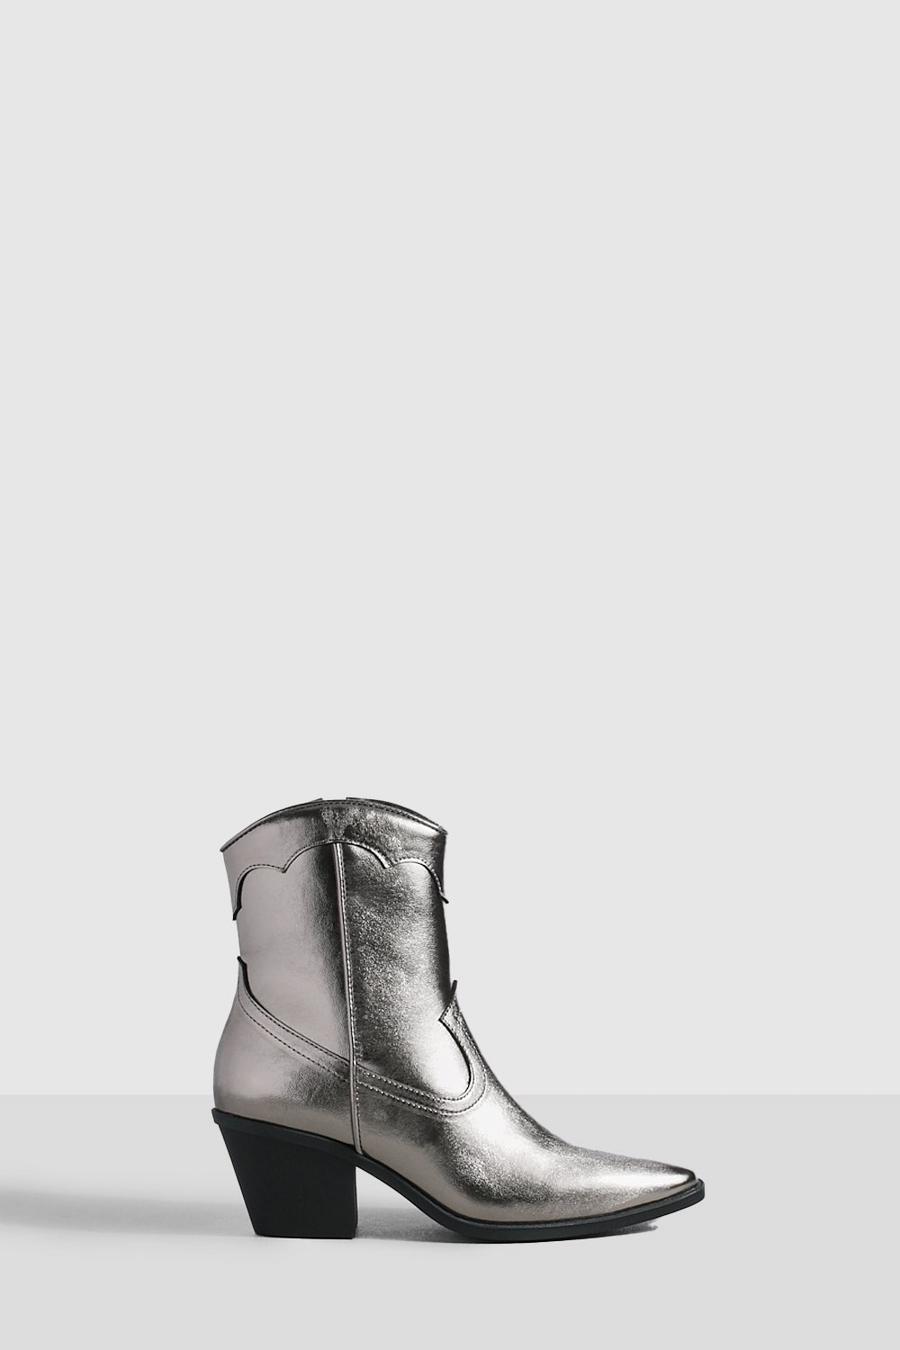 Pewter grey Metallic Cowboy Western Ankle Boots